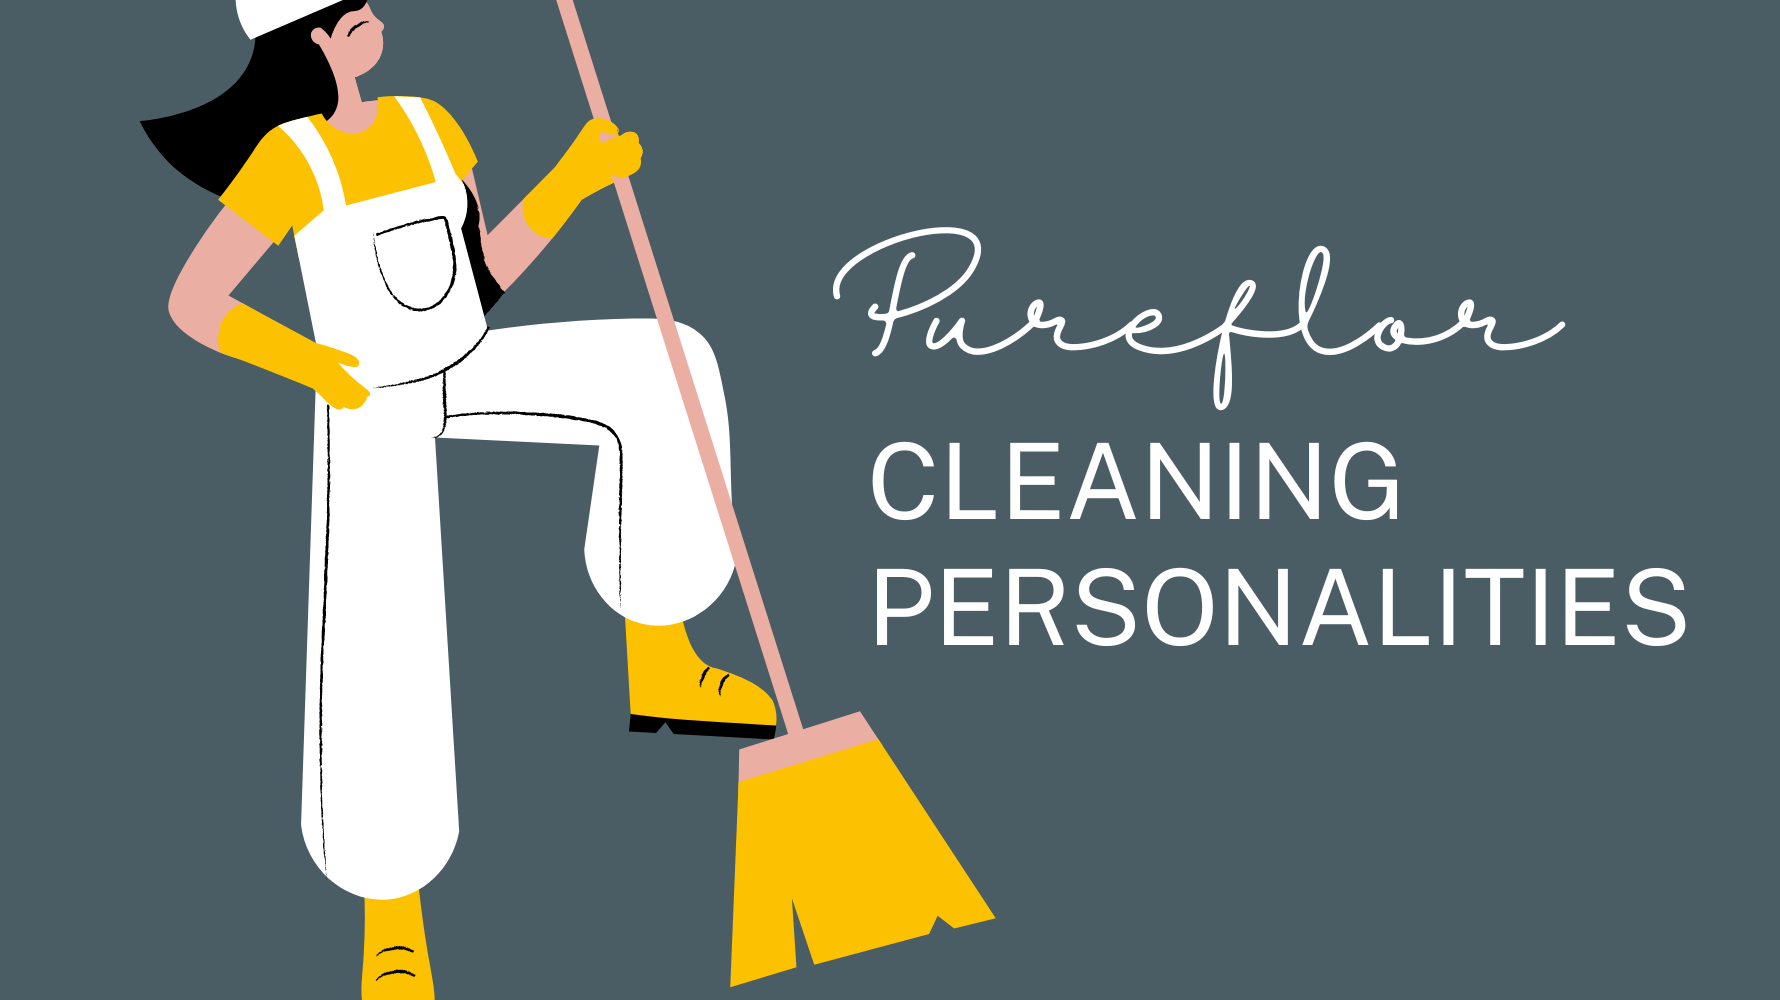 Cleaning personality types